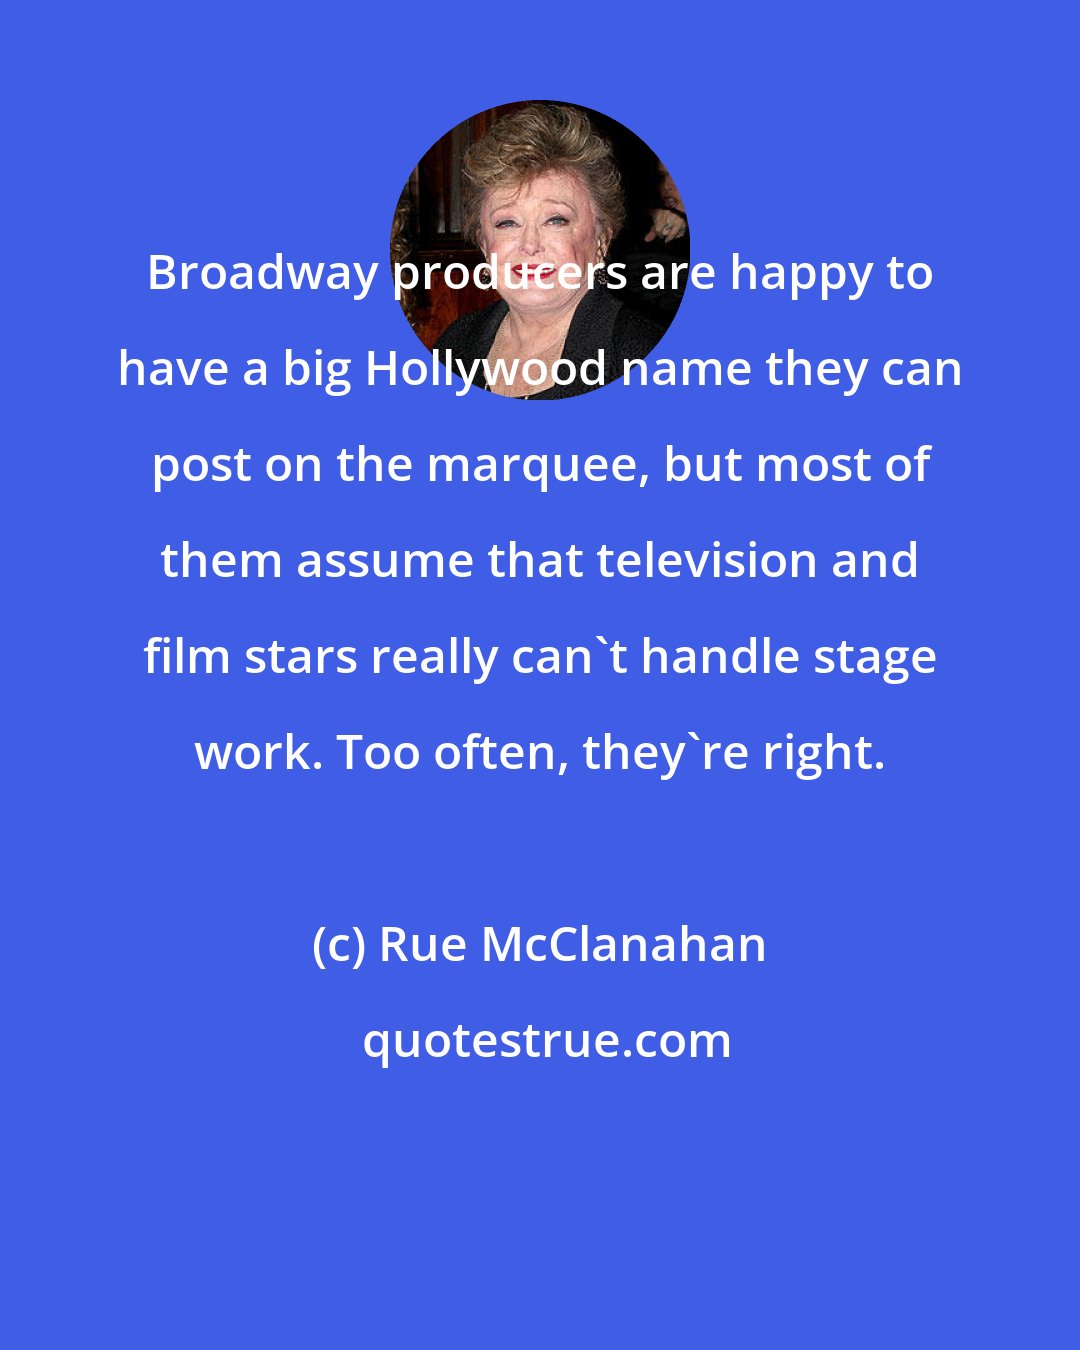 Rue McClanahan: Broadway producers are happy to have a big Hollywood name they can post on the marquee, but most of them assume that television and film stars really can't handle stage work. Too often, they're right.